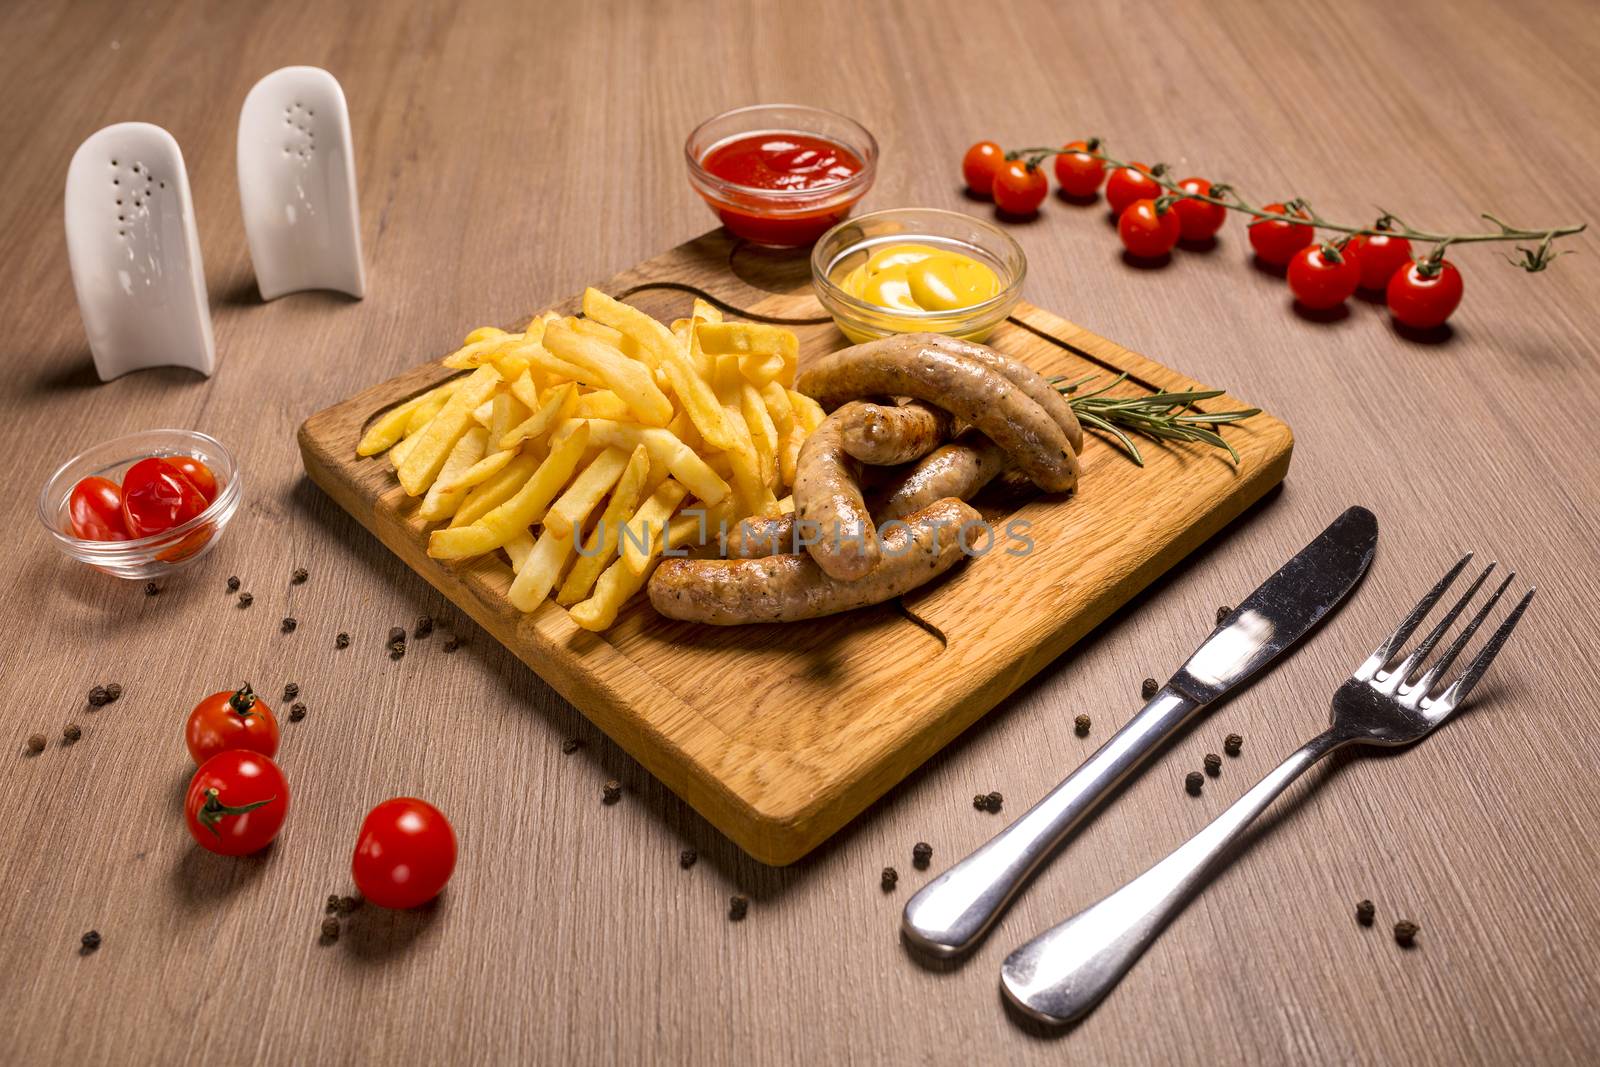 Grilled sausages with french fries with ketchup and mustard on a wooden stand. by 977_ReX_977